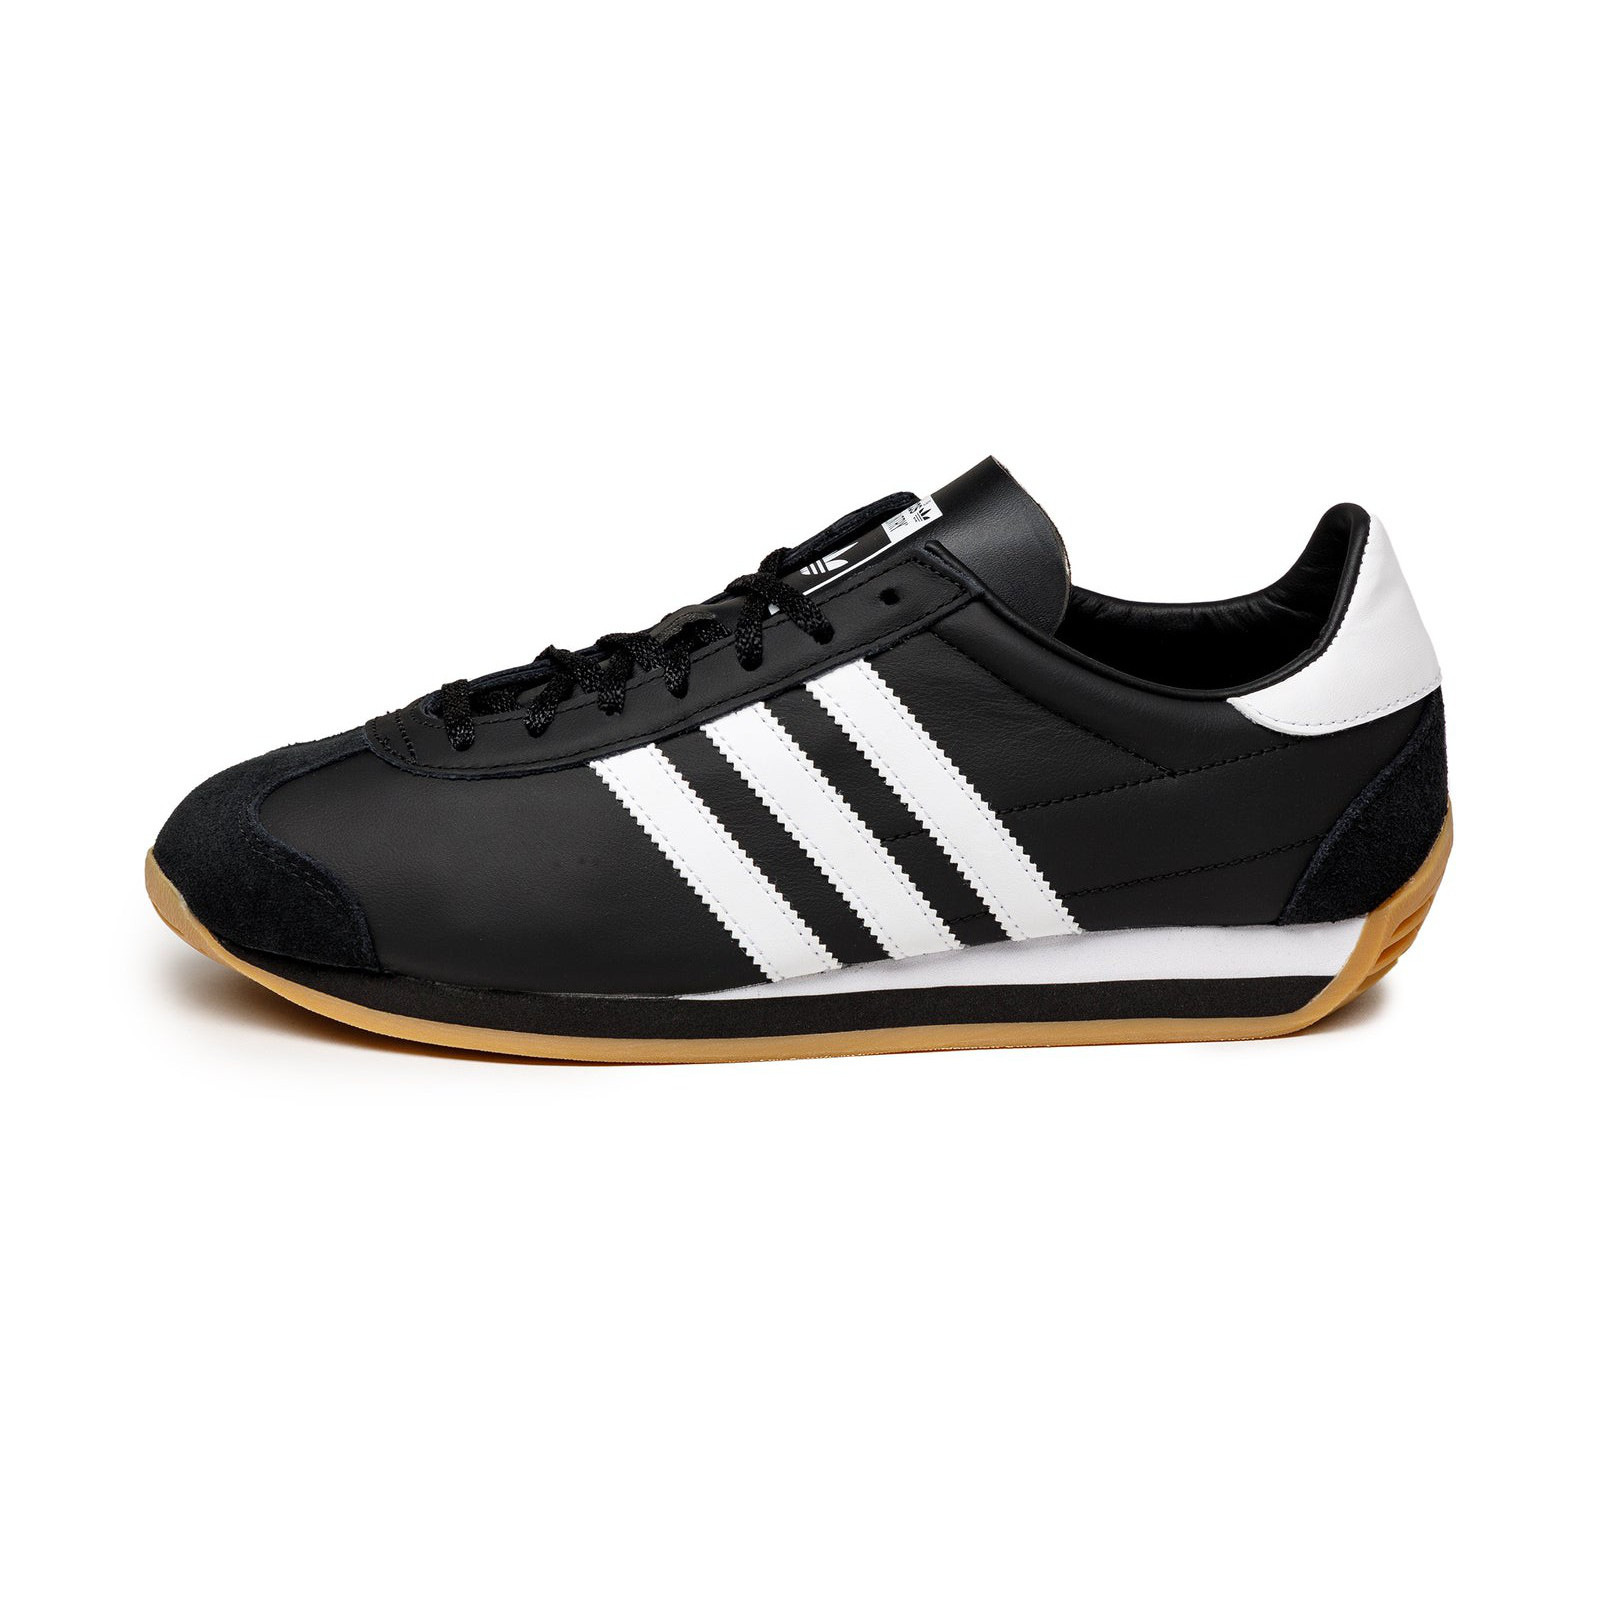 Adidas Country OG
Core Black / Footwear White